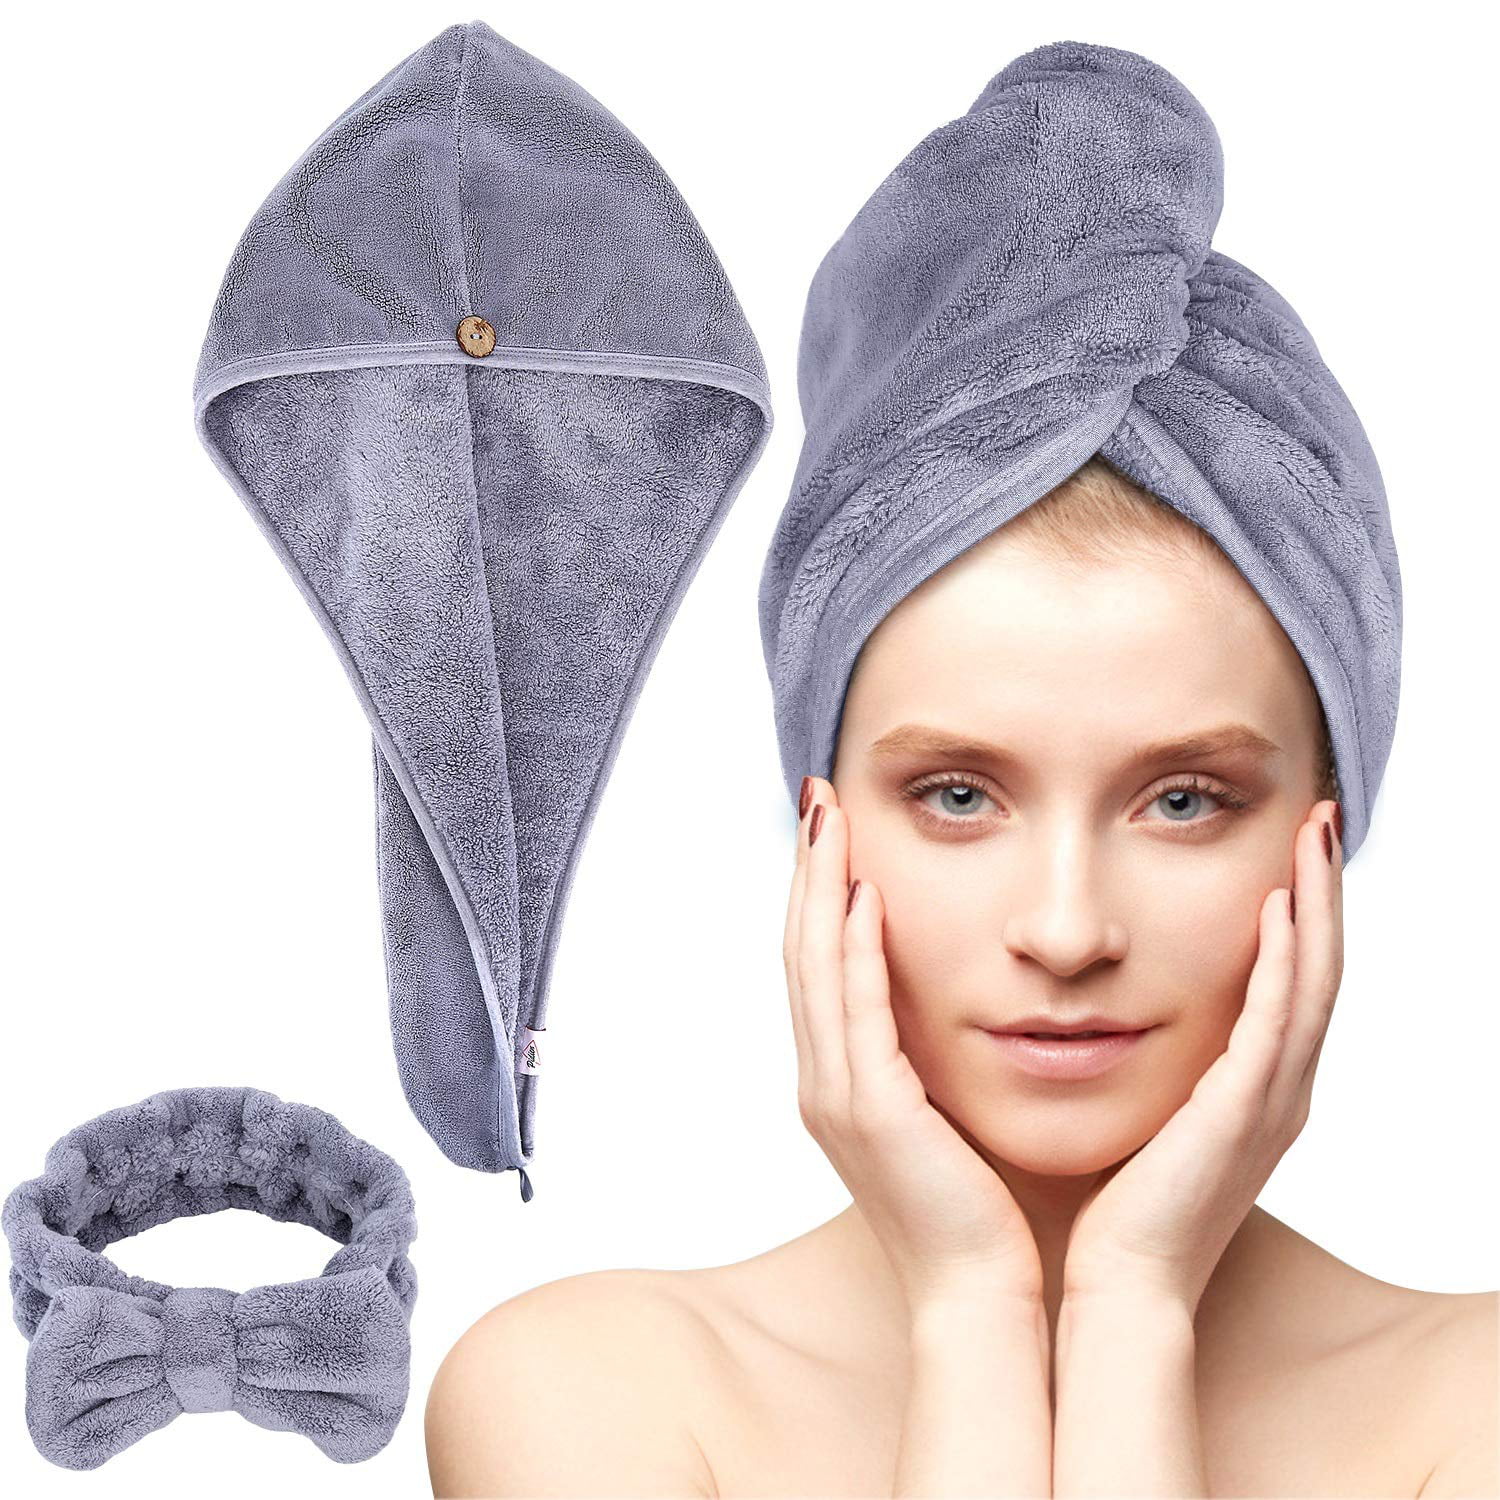 Women Strong Absorbent Water Bow Bath Hair Drying Towel Wrap Elastic Adjustable 